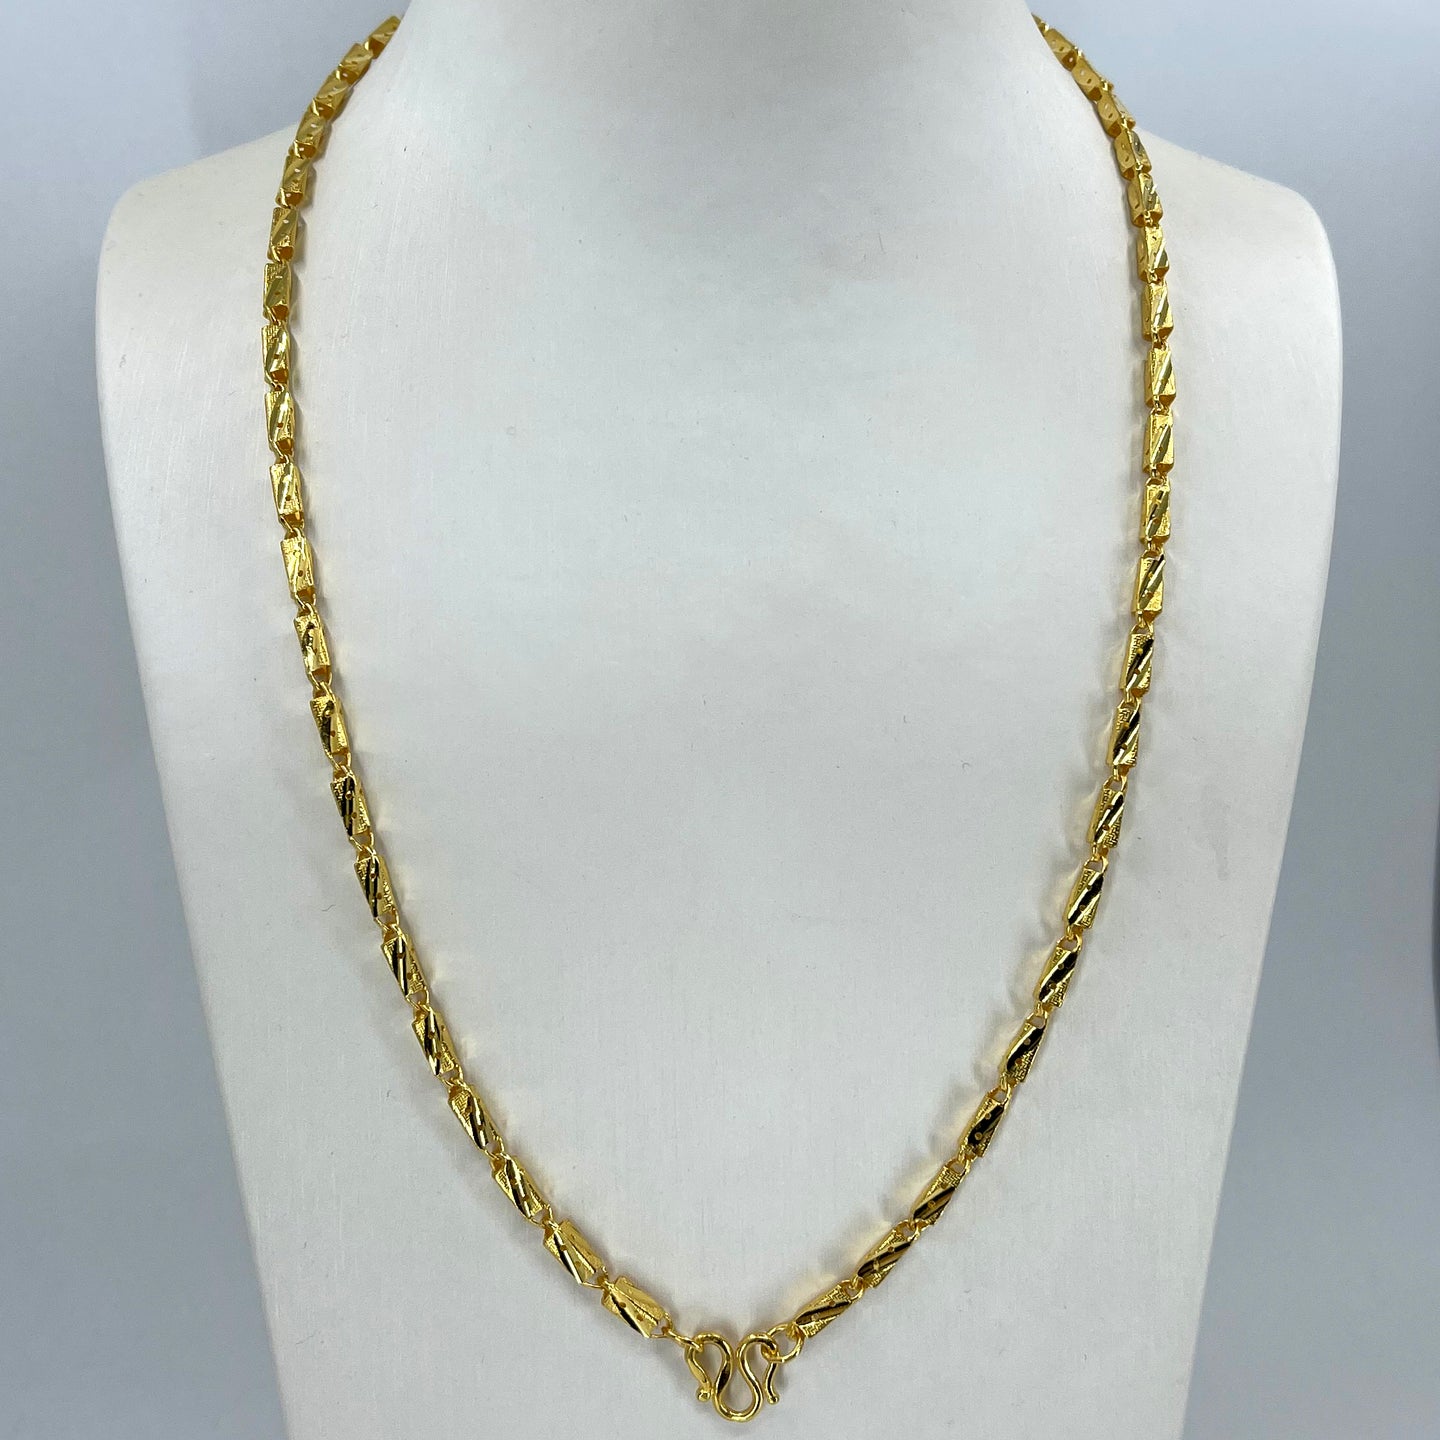 24K Solid Yellow Gold Barrel Link Chain 25.6 Grams 22